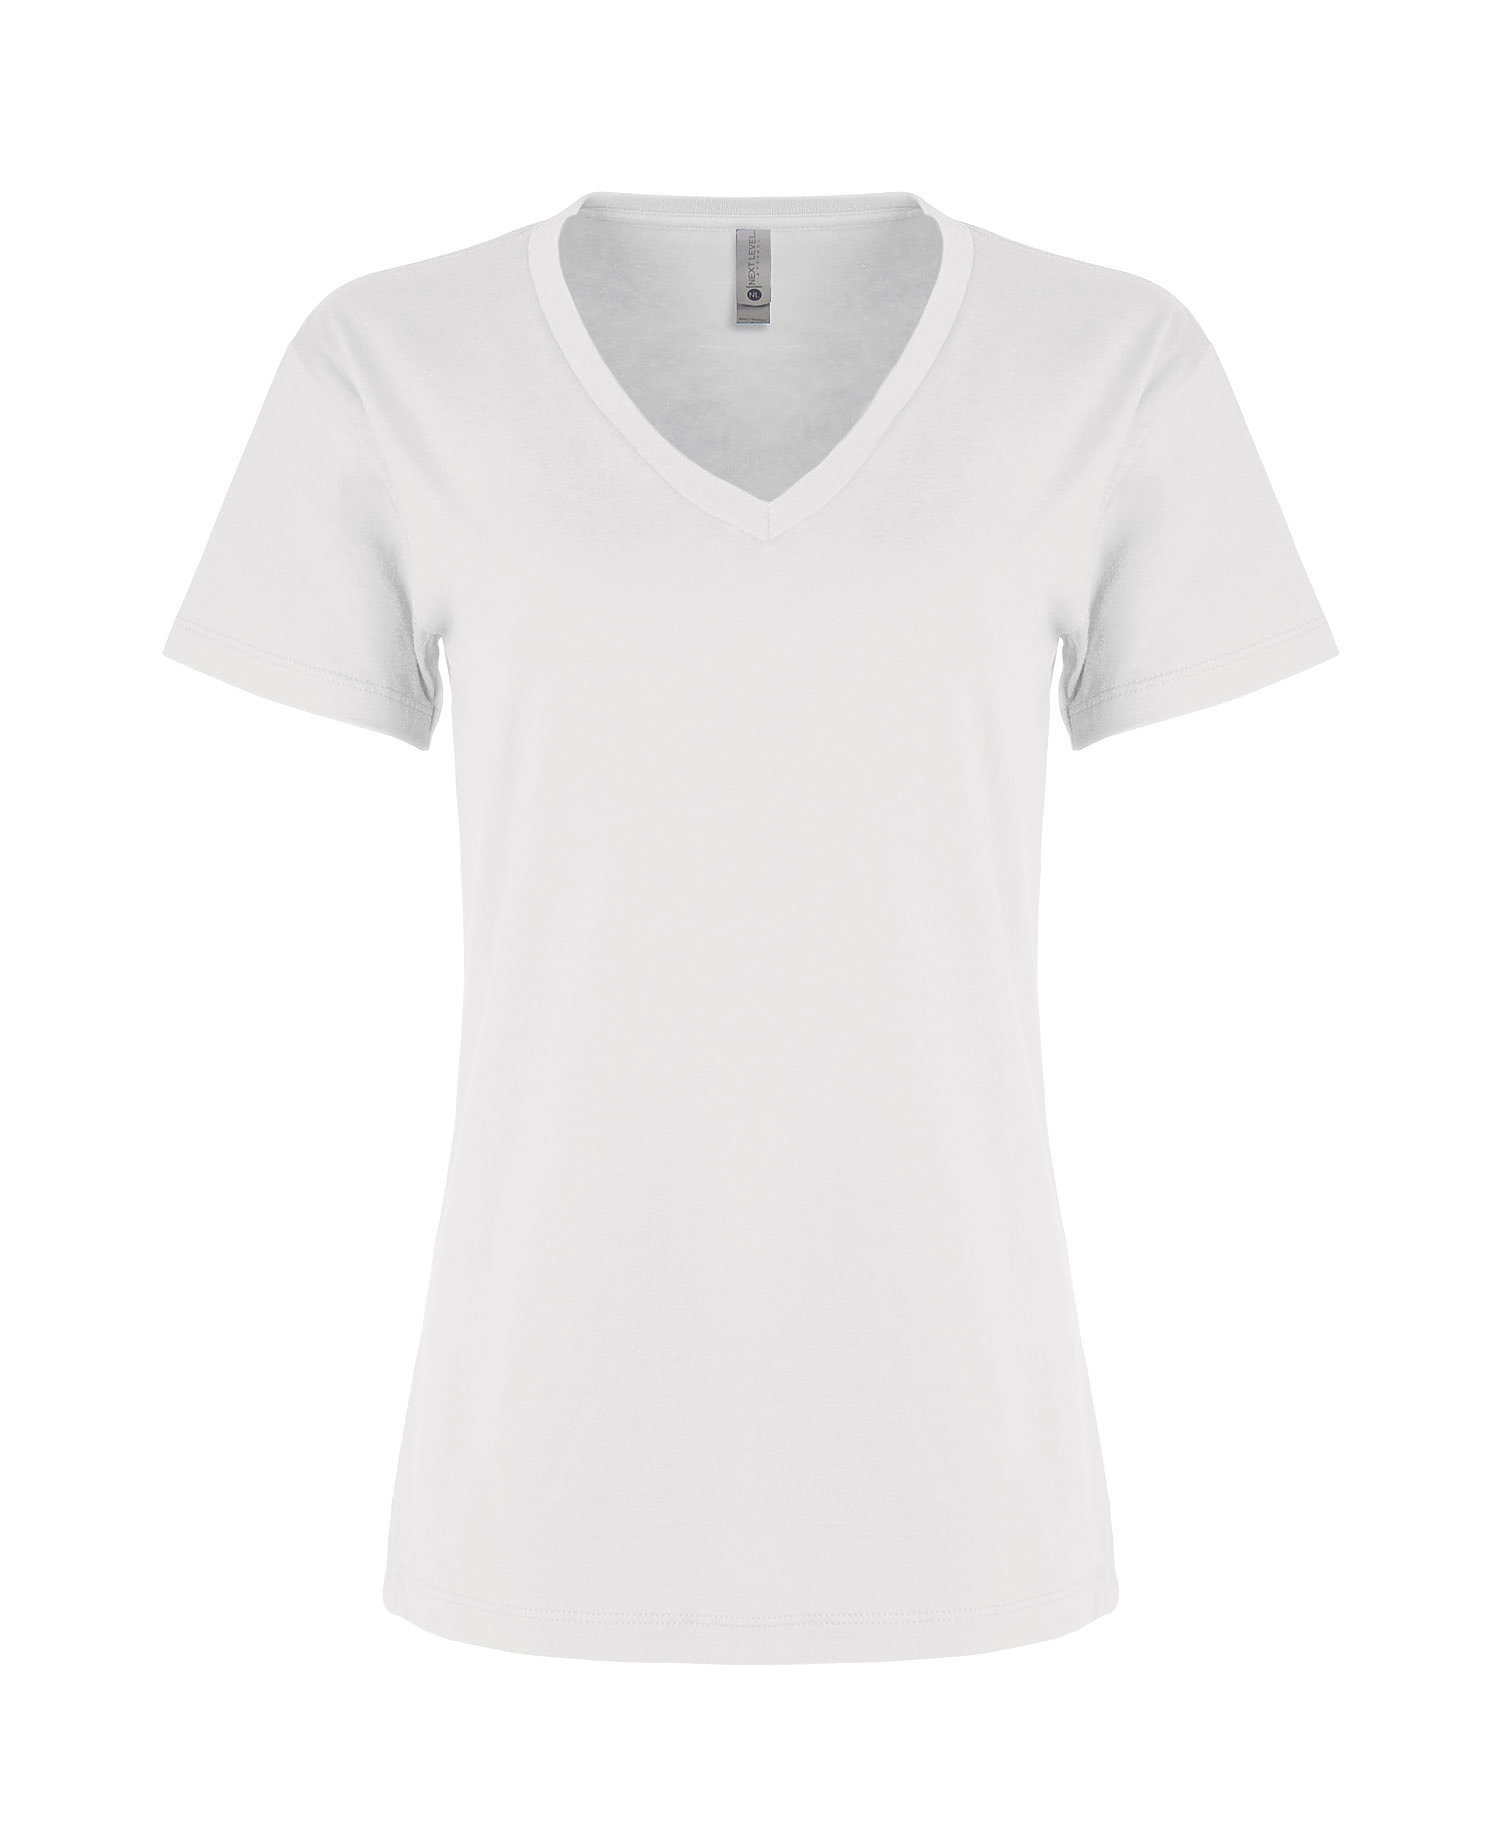 Next Level - 3940 - Women's Fine Jersey Relaxed V T-...